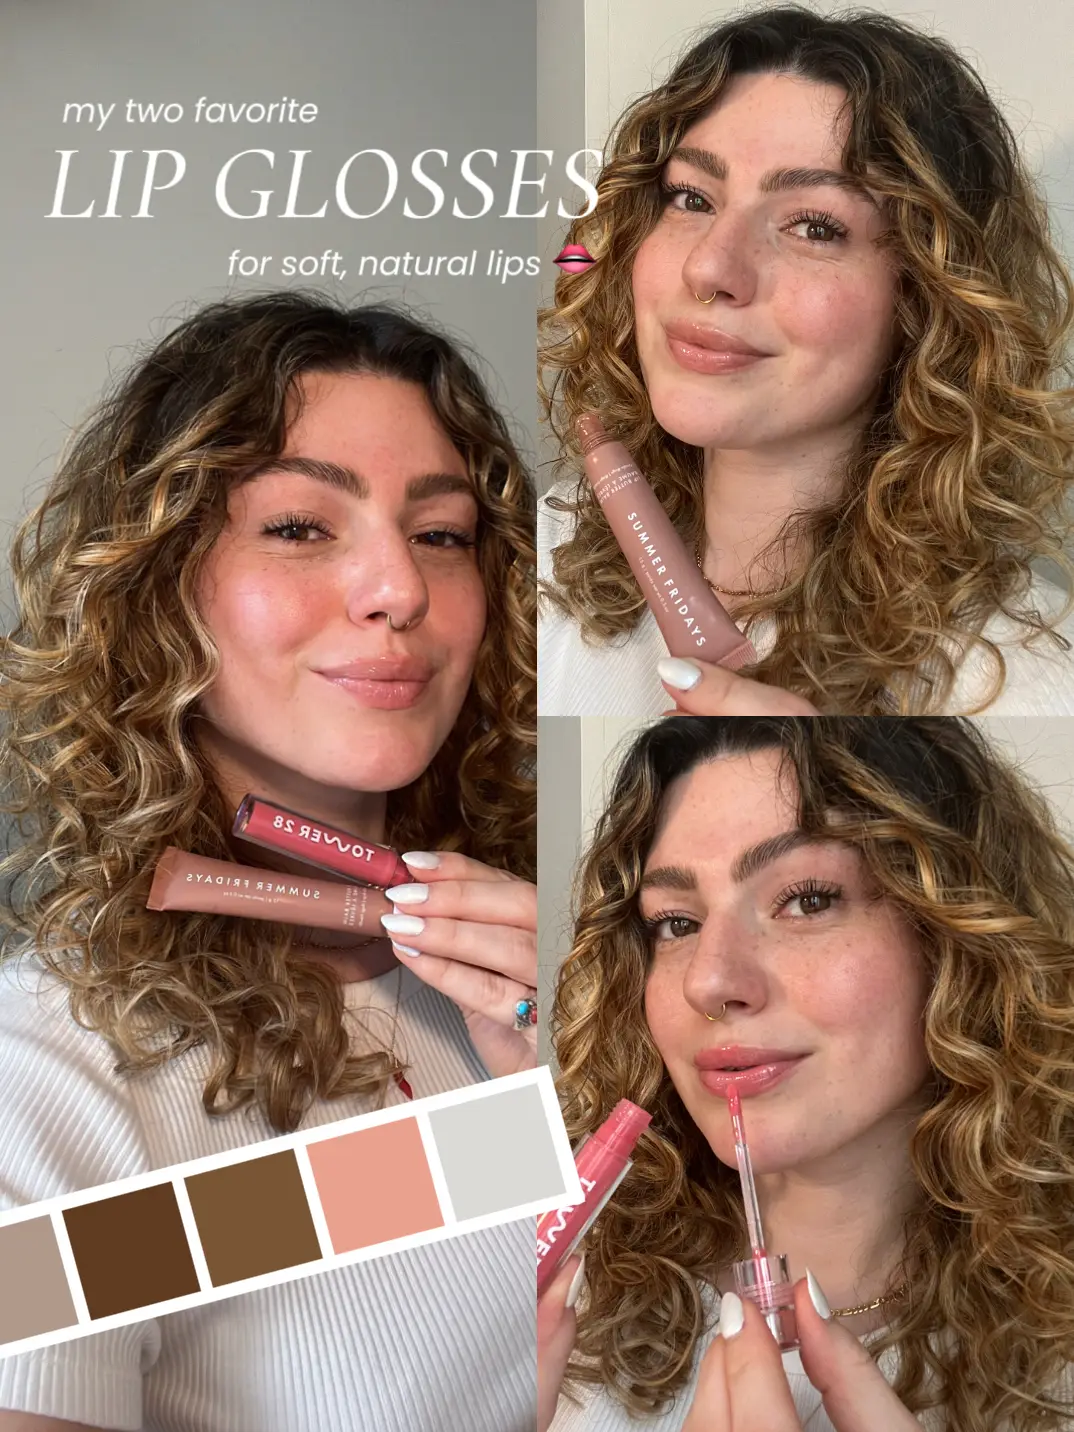 lip glosses for soft + juicy lips 🫦, Gallery posted by Britt Minetti